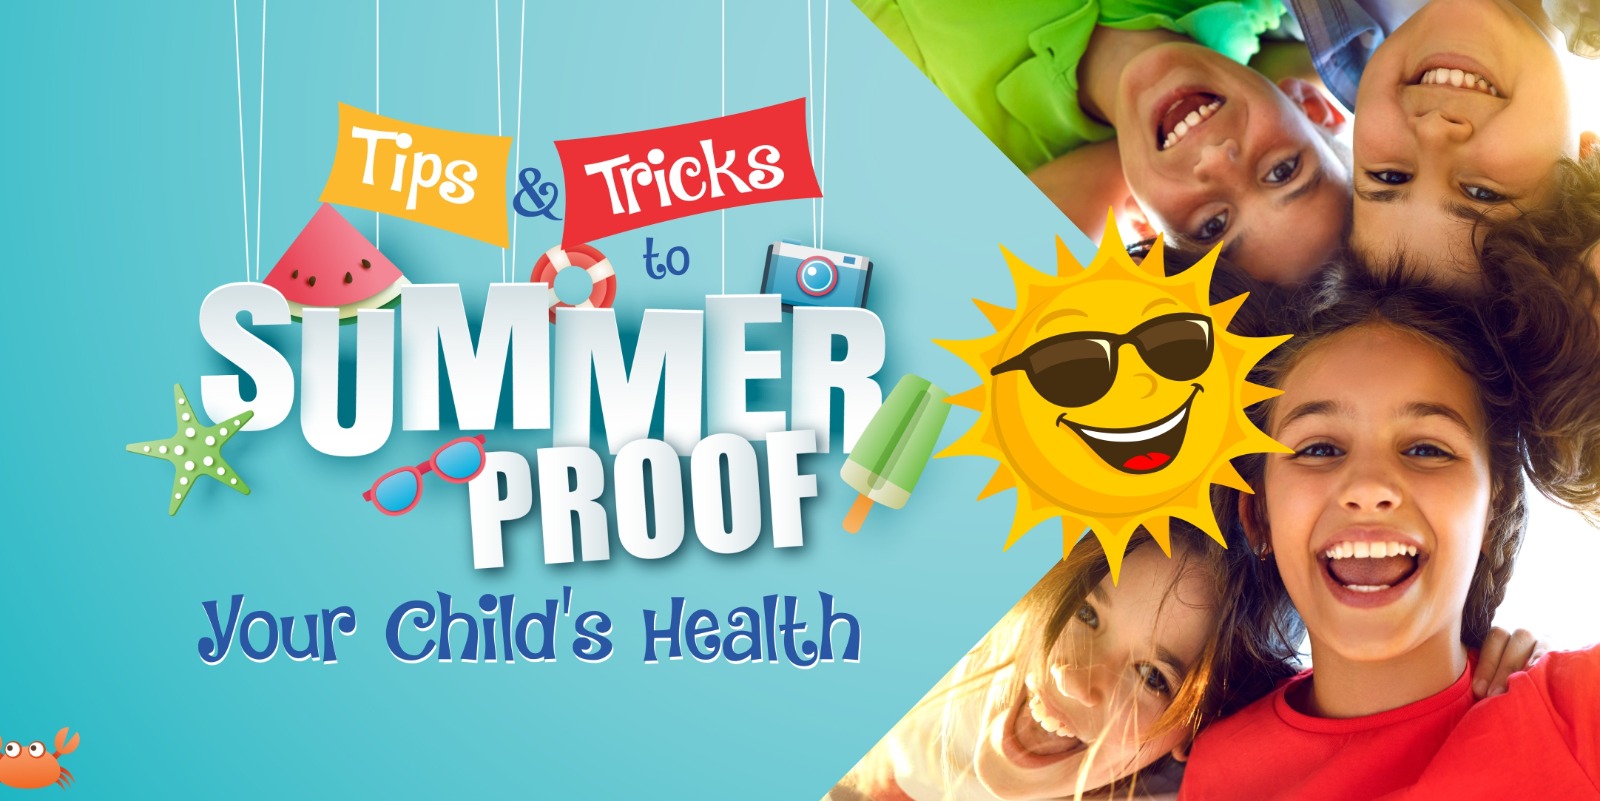 Tips and Tricks to Summer-proof Your Child’s Healt